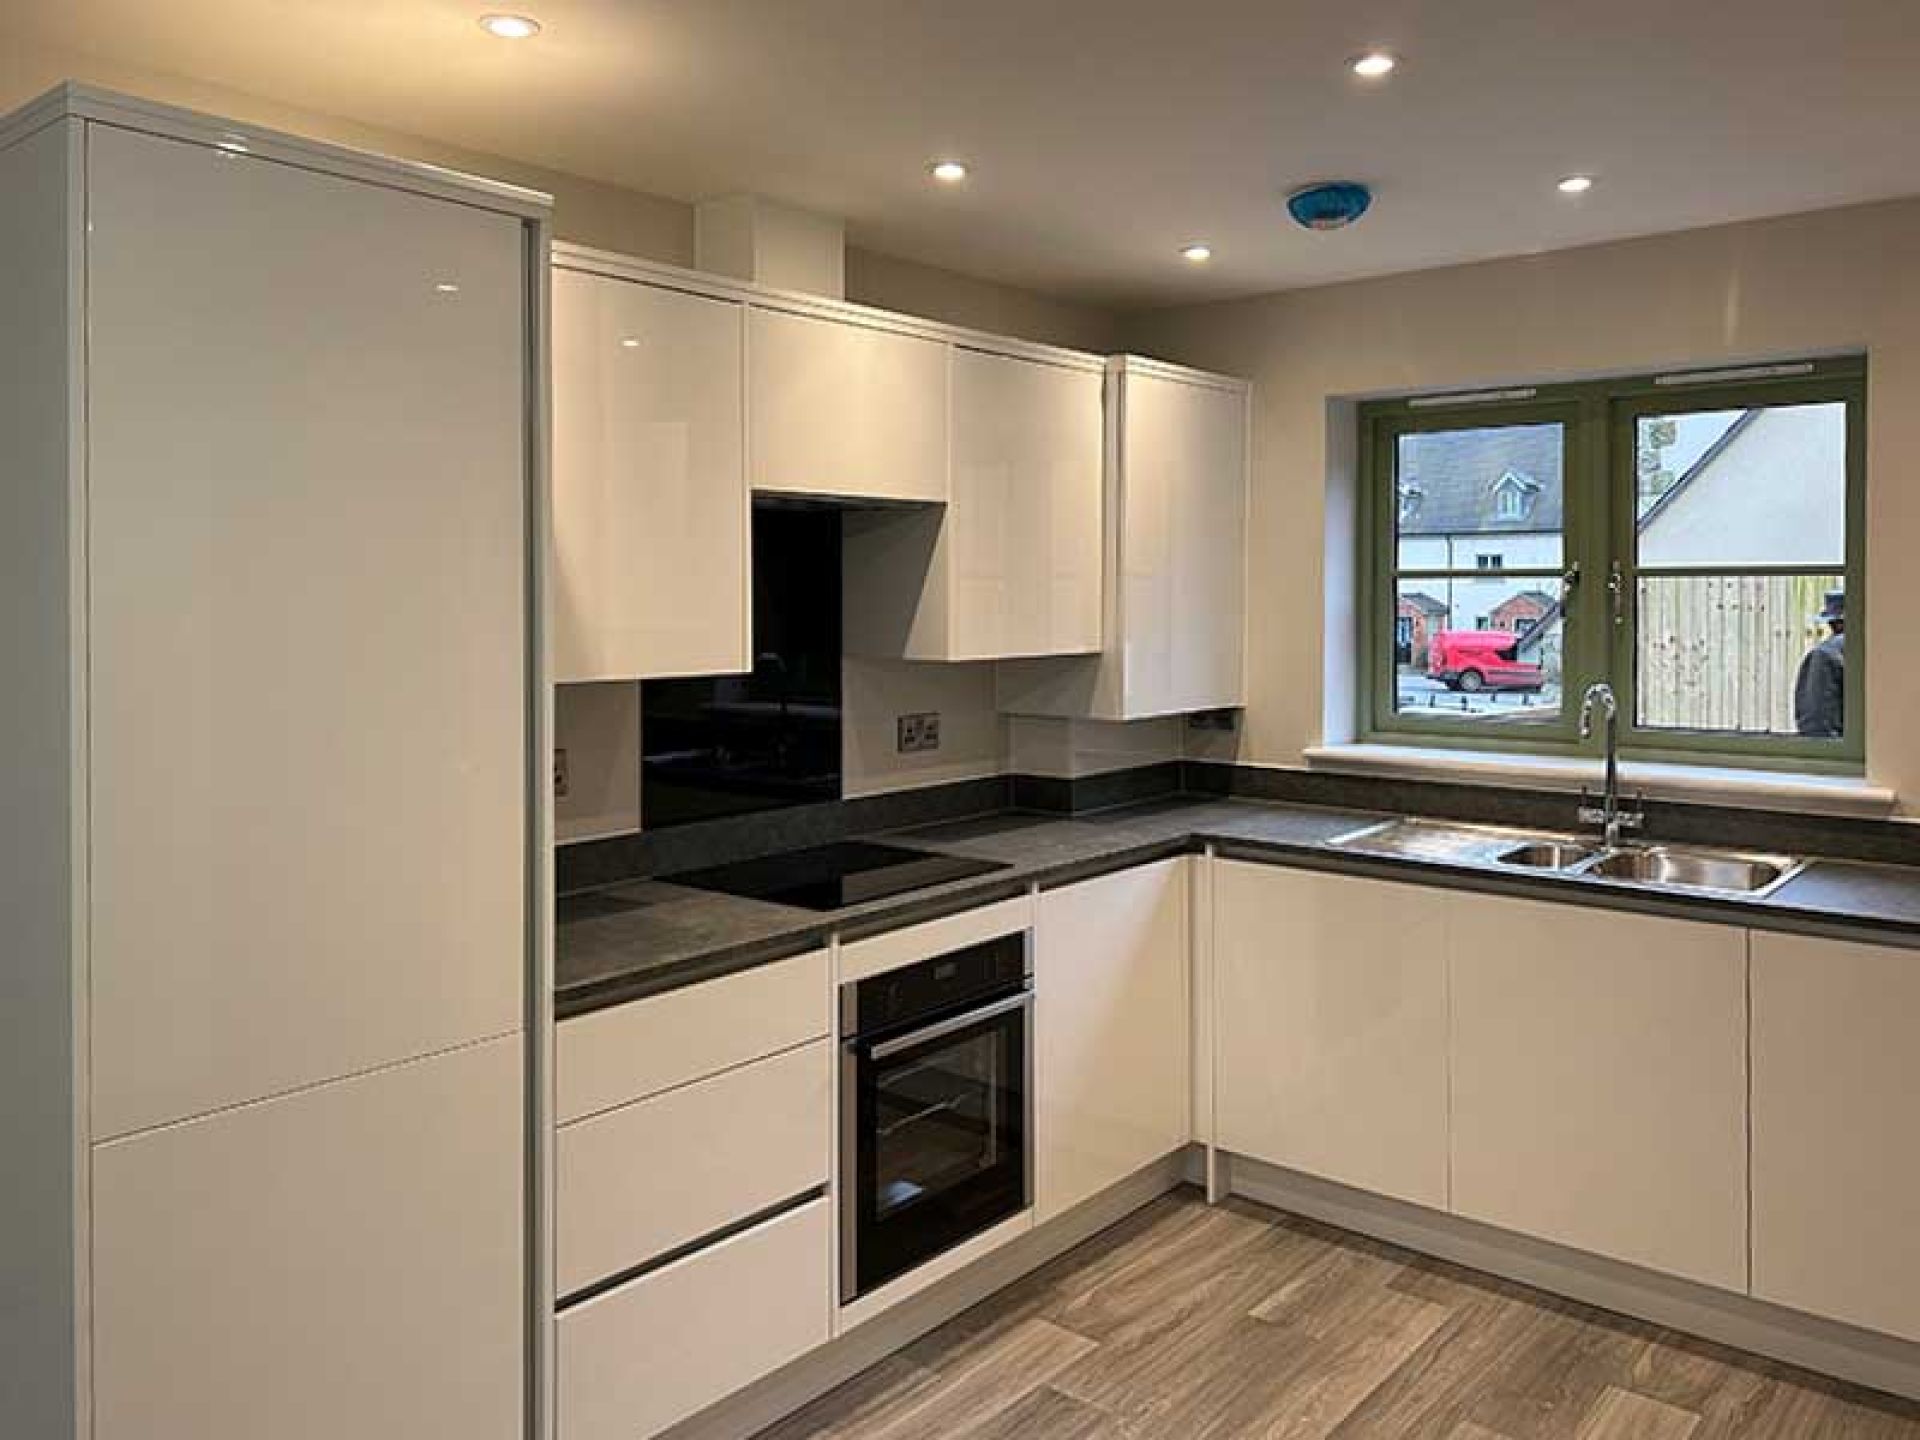 View of the kitchen are at one of the terraced houses in the bourton mill site home looking at the sink area and fridge.